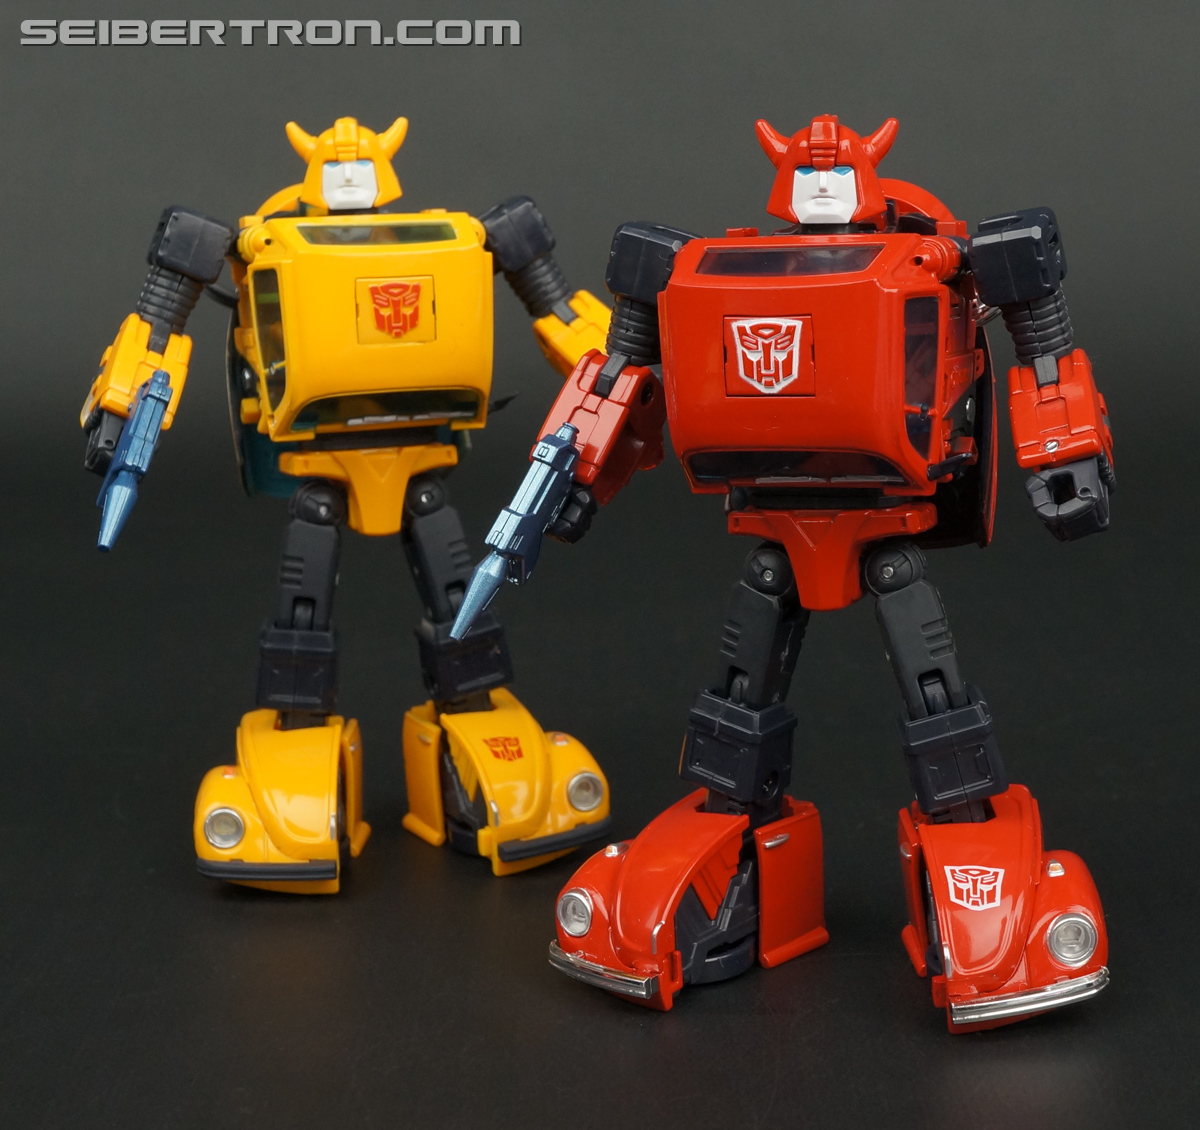 red bumblebee transformers